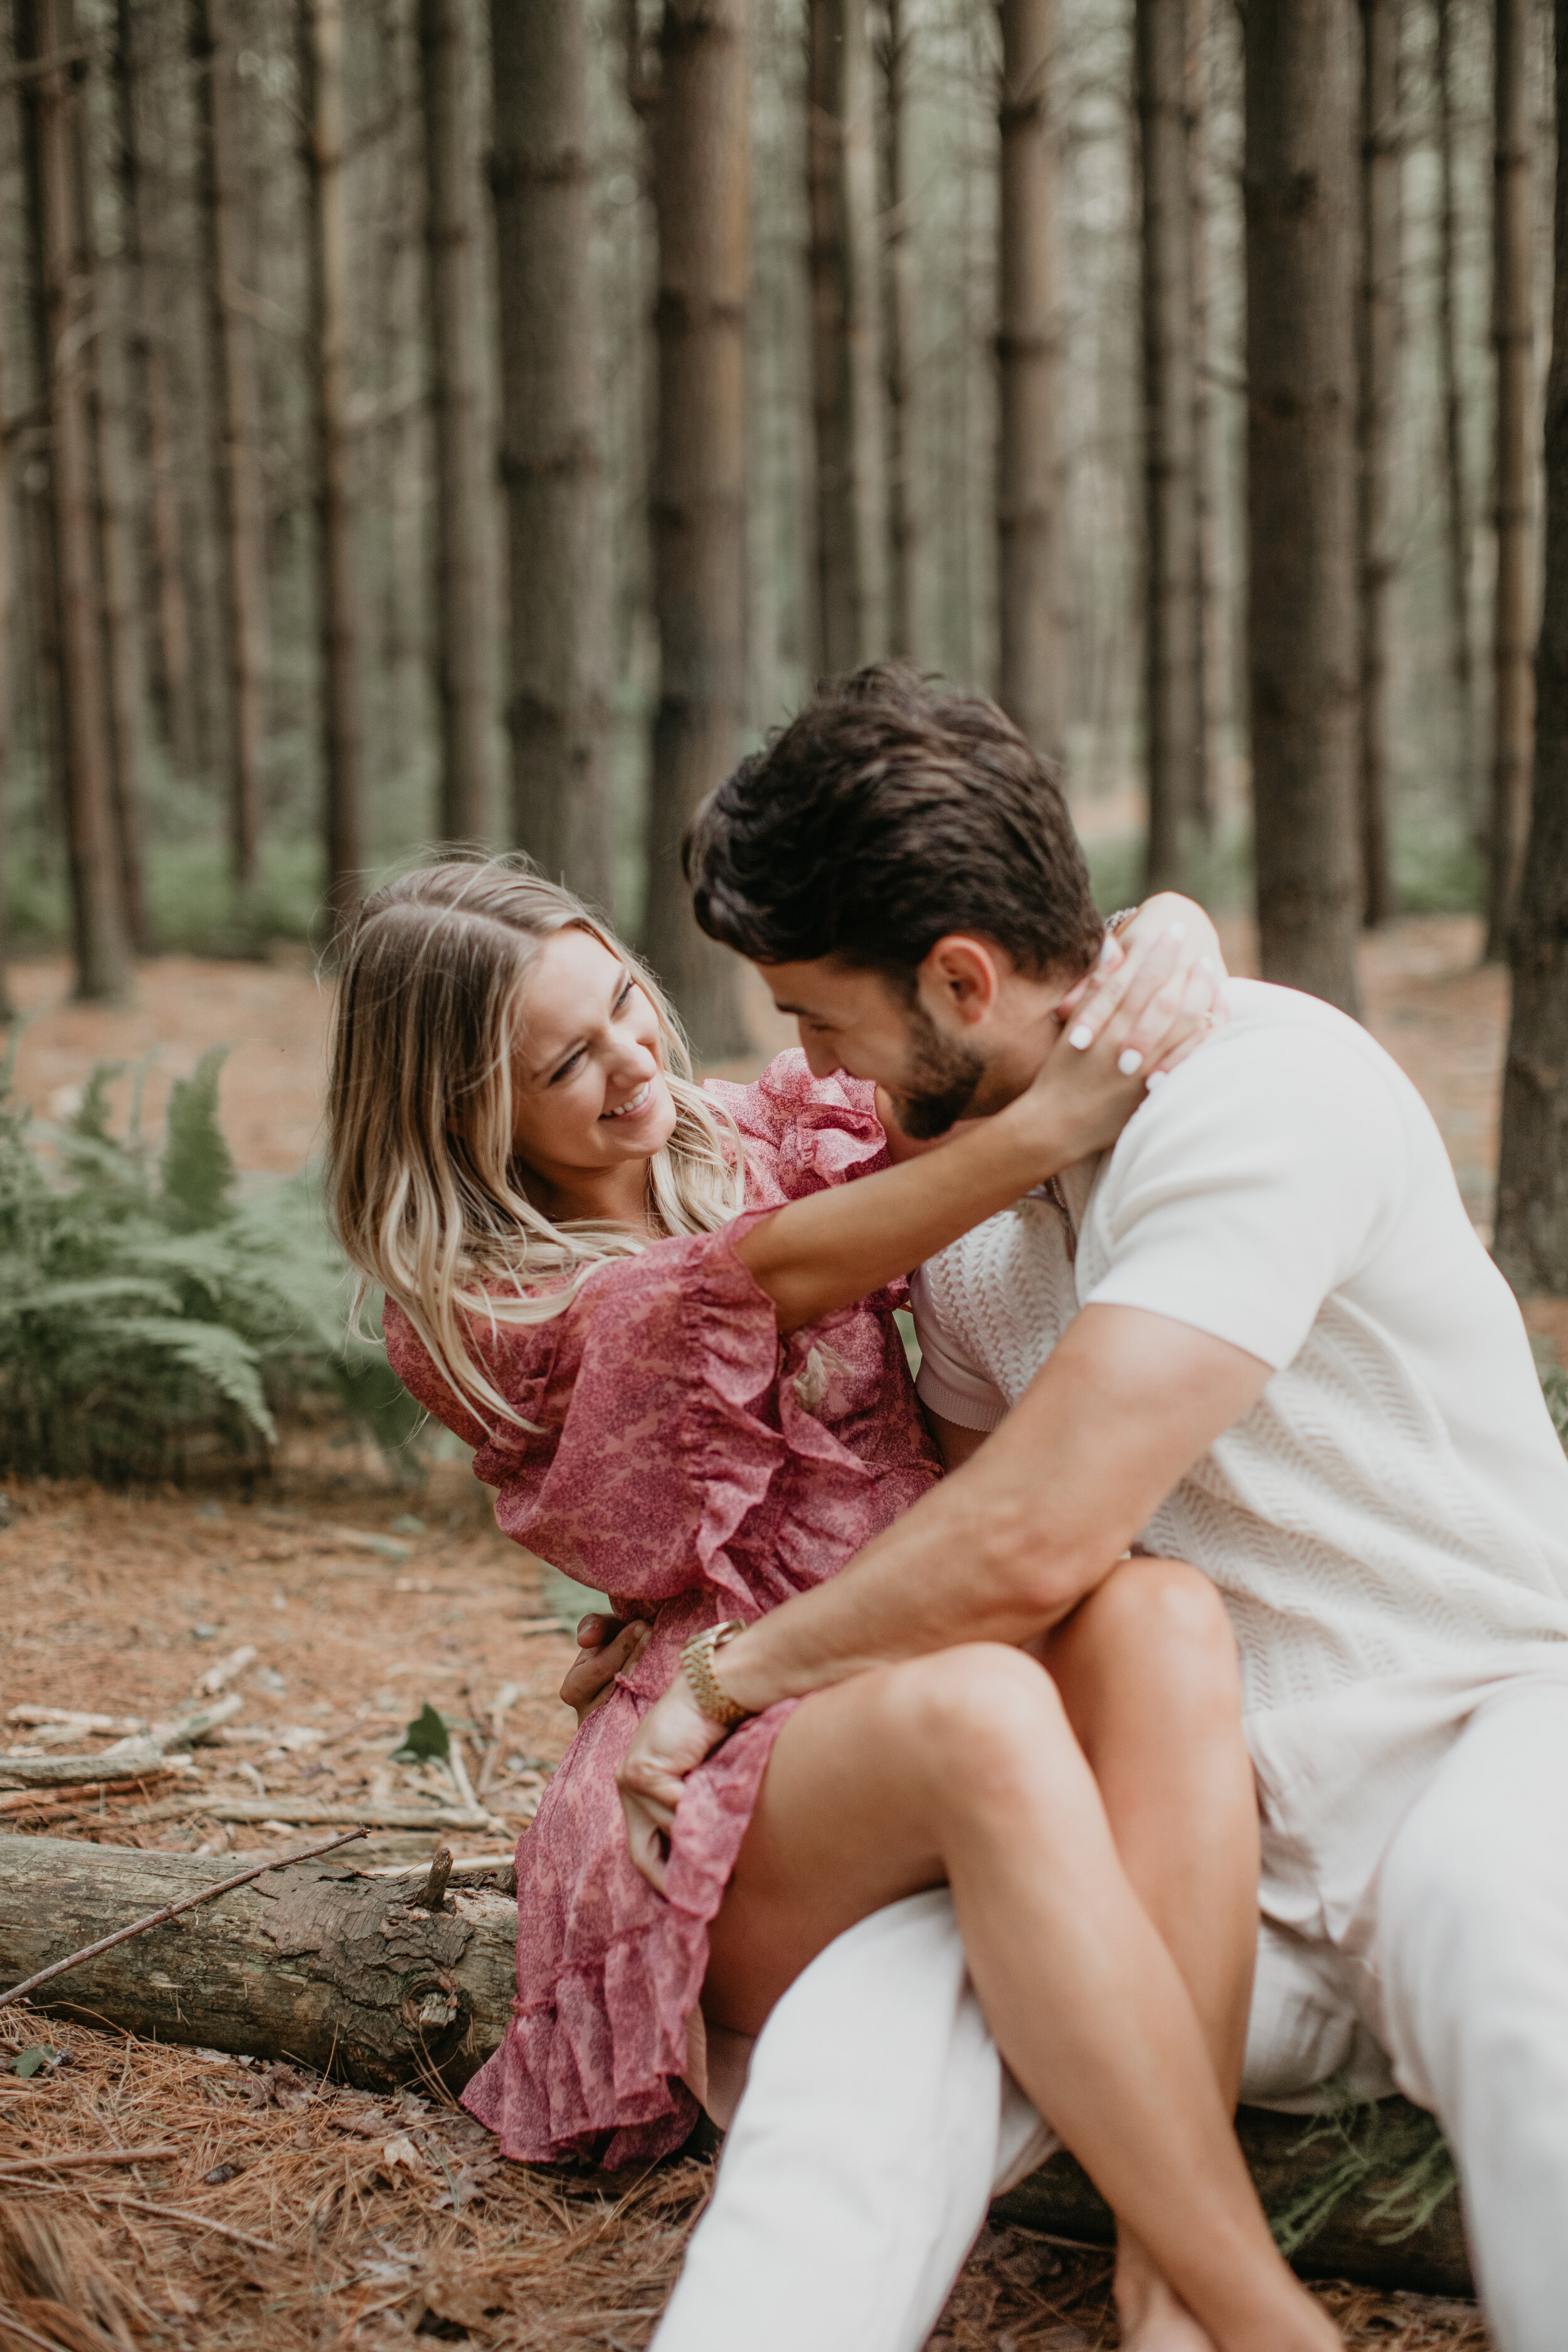 Nicole-Daacke-Photography-michaux-state-forest-elopement-adventure-engagement-session-pennsylvania-elopement-pa-elopement-photographer-gettysburg-photographer-state-park-elopement-engagement-session-pennsylvania-waterfall-112.jpg